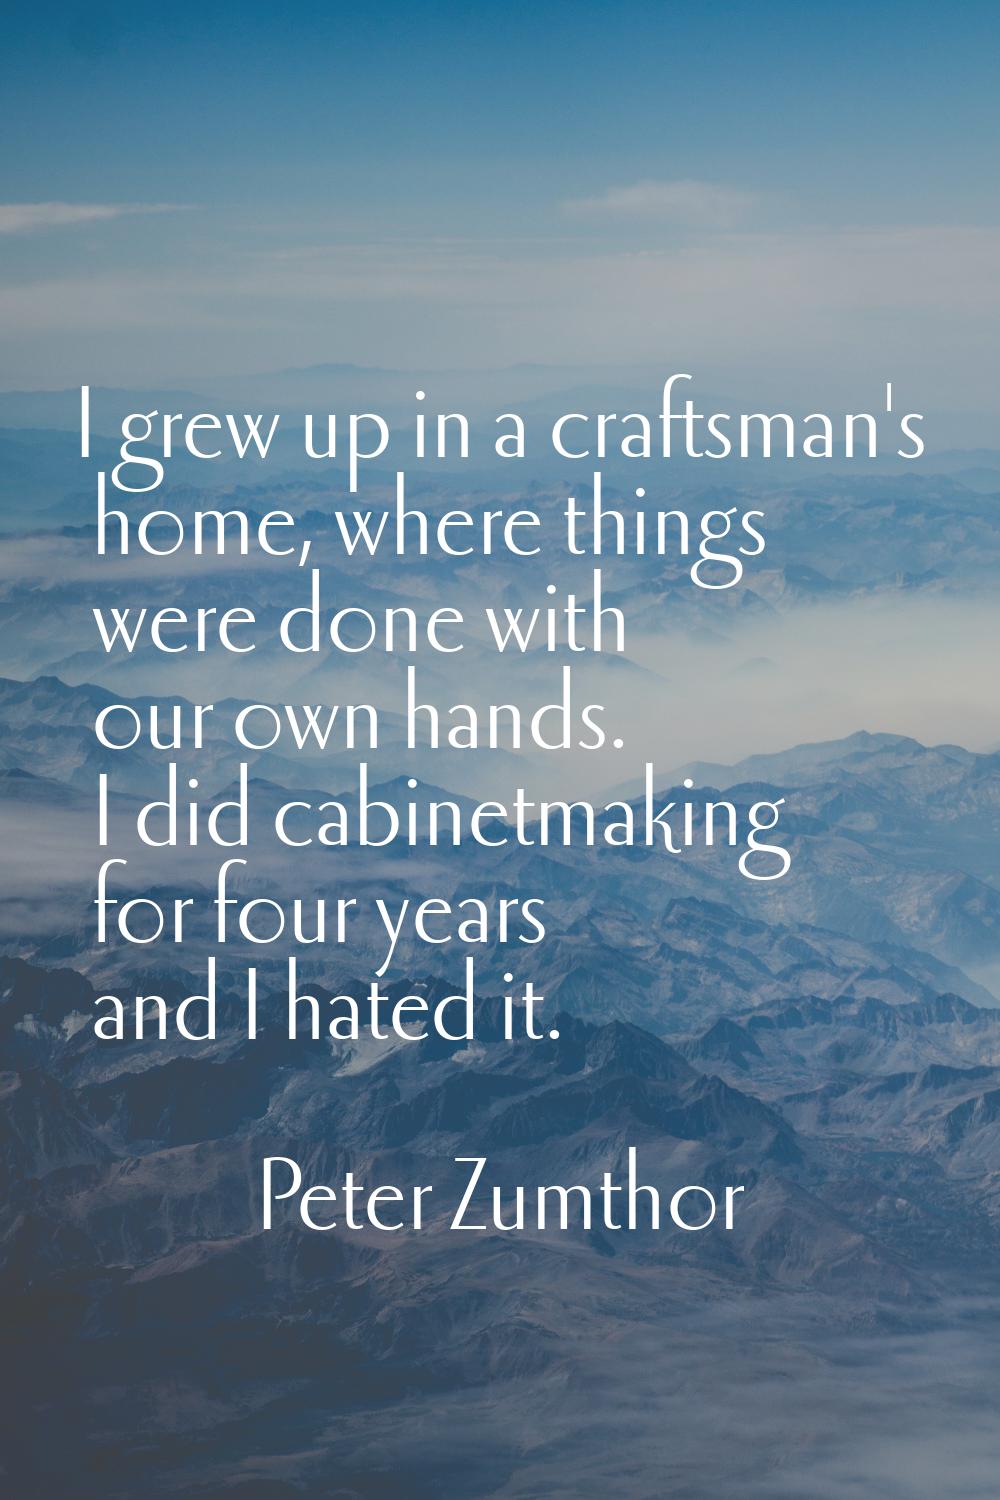 I grew up in a craftsman's home, where things were done with our own hands. I did cabinetmaking for